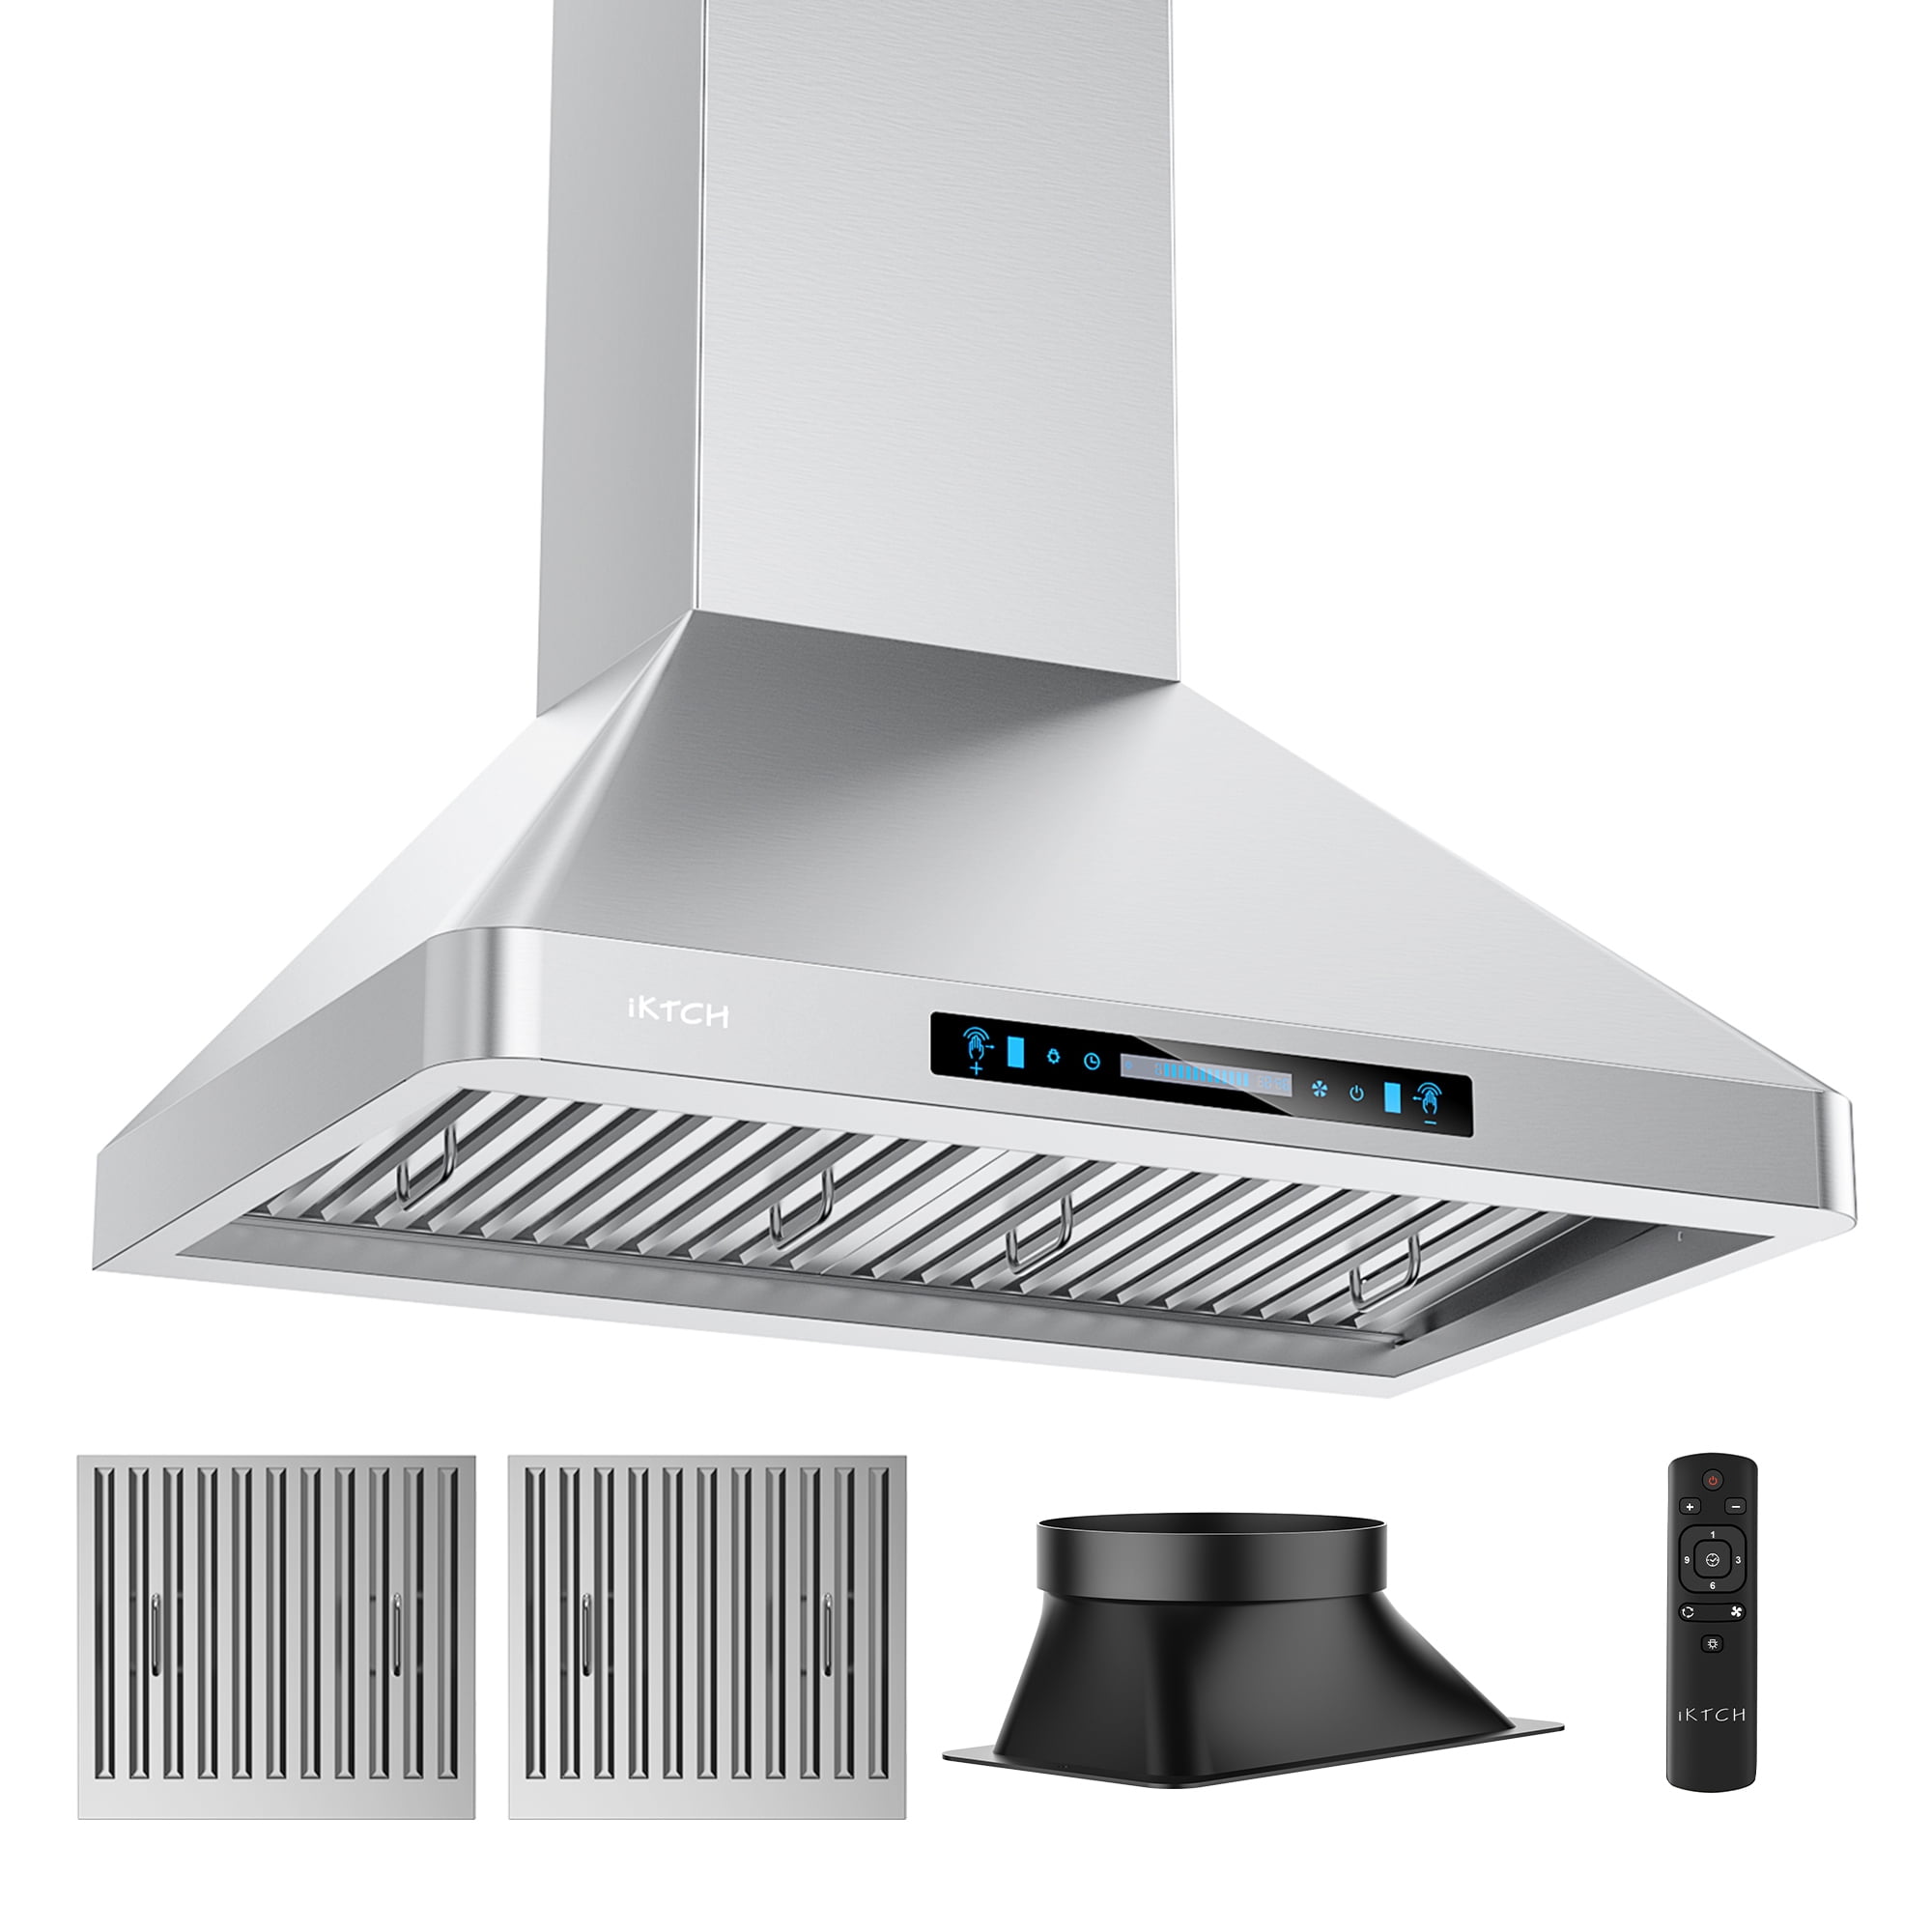 IKTCH Range Hoods 30 Inch Wall Mount , 900 CFM Ducted/Ductless Range Hood  with 4 Speed Fan, Pure Stainless Steel Range Hood 30 inch with Gesture 